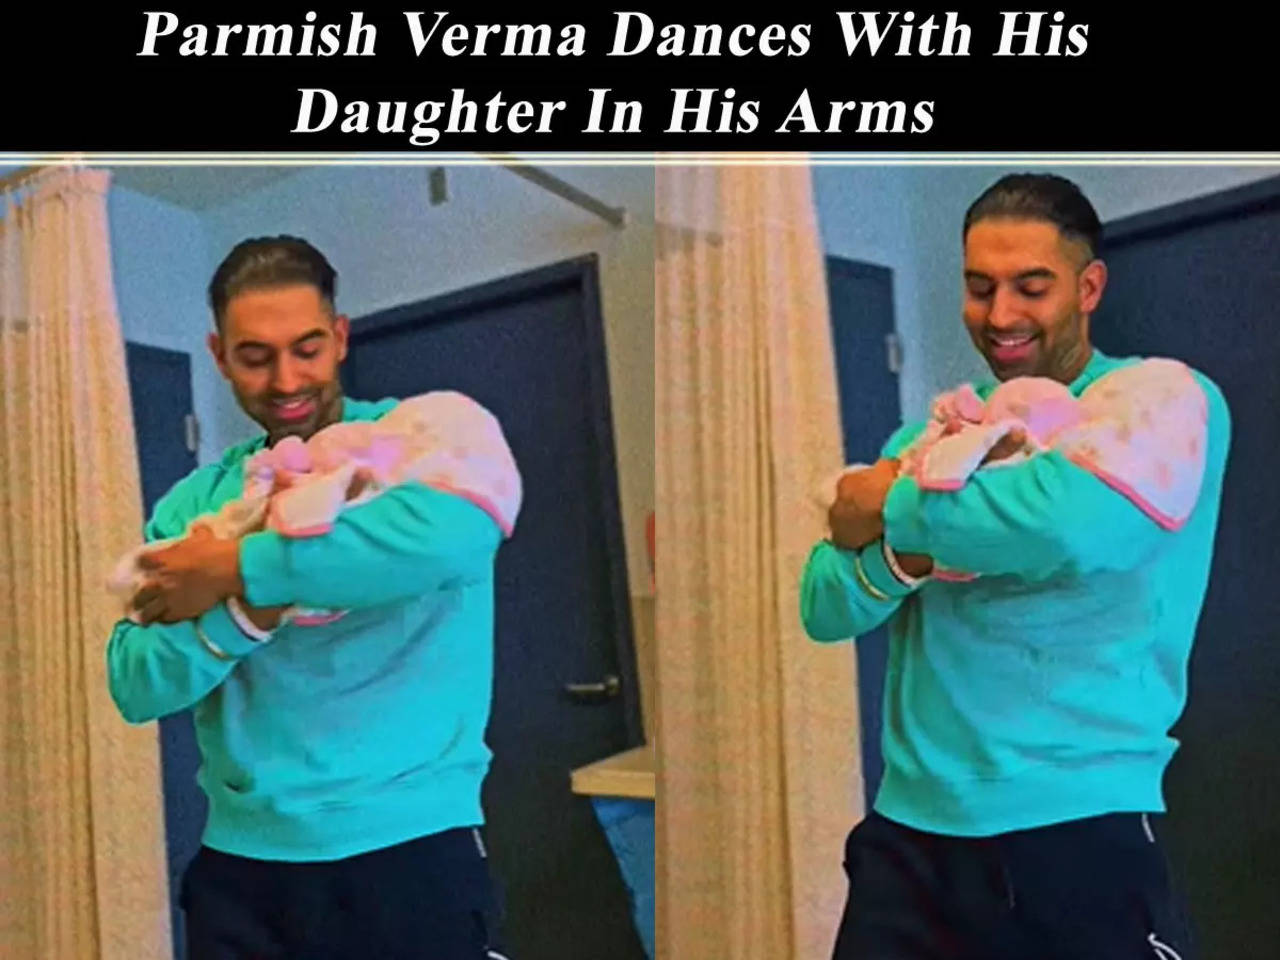 Parmish Verma dancing with his newborn daughter in his arms is the ...